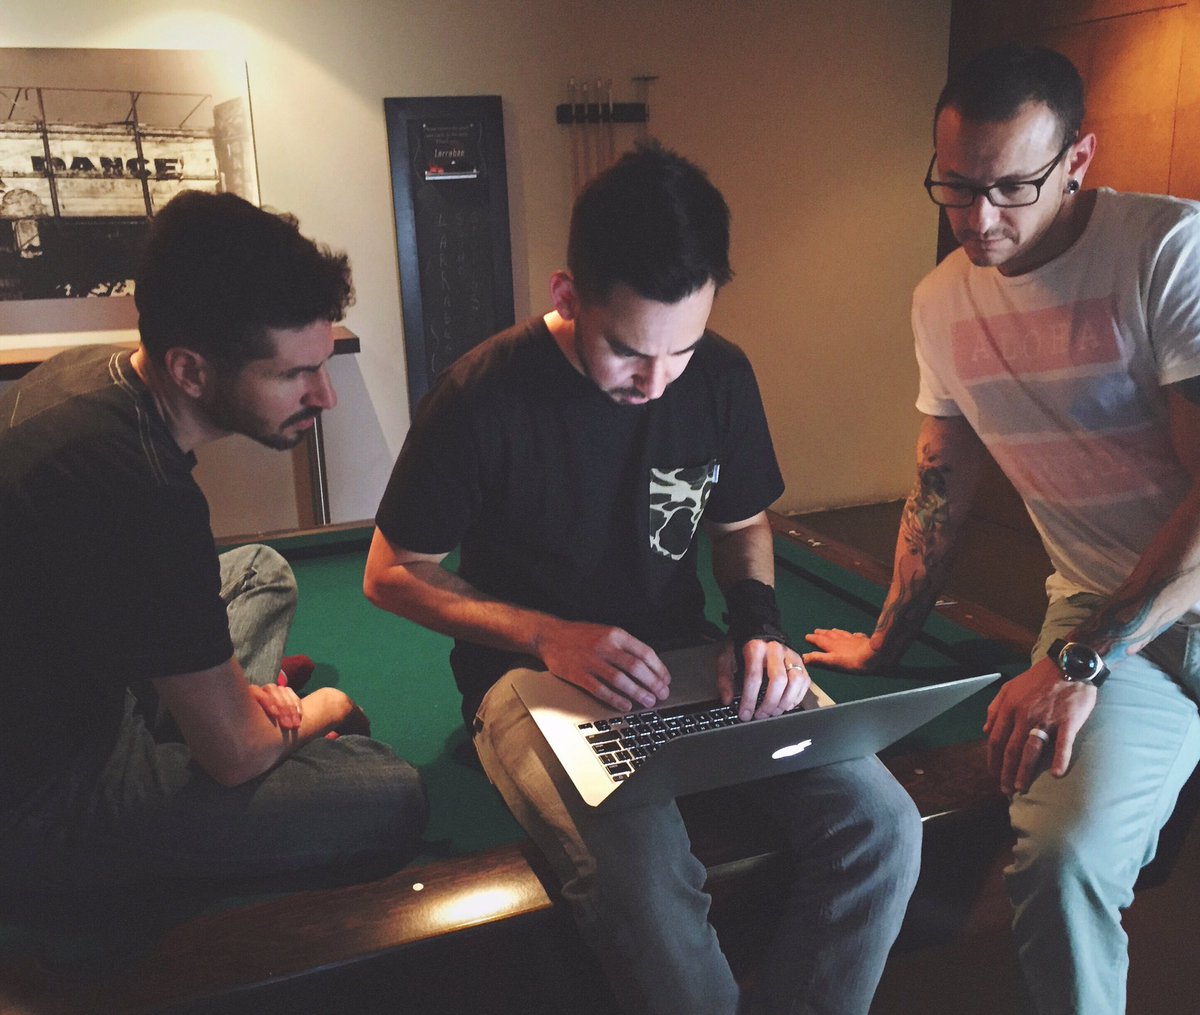 Brad, Mike and Chester writing the latest studio update sent a few weeks ago. Stay tuned, more updates coming soon. https://t.co/MLdXy4Yn7C